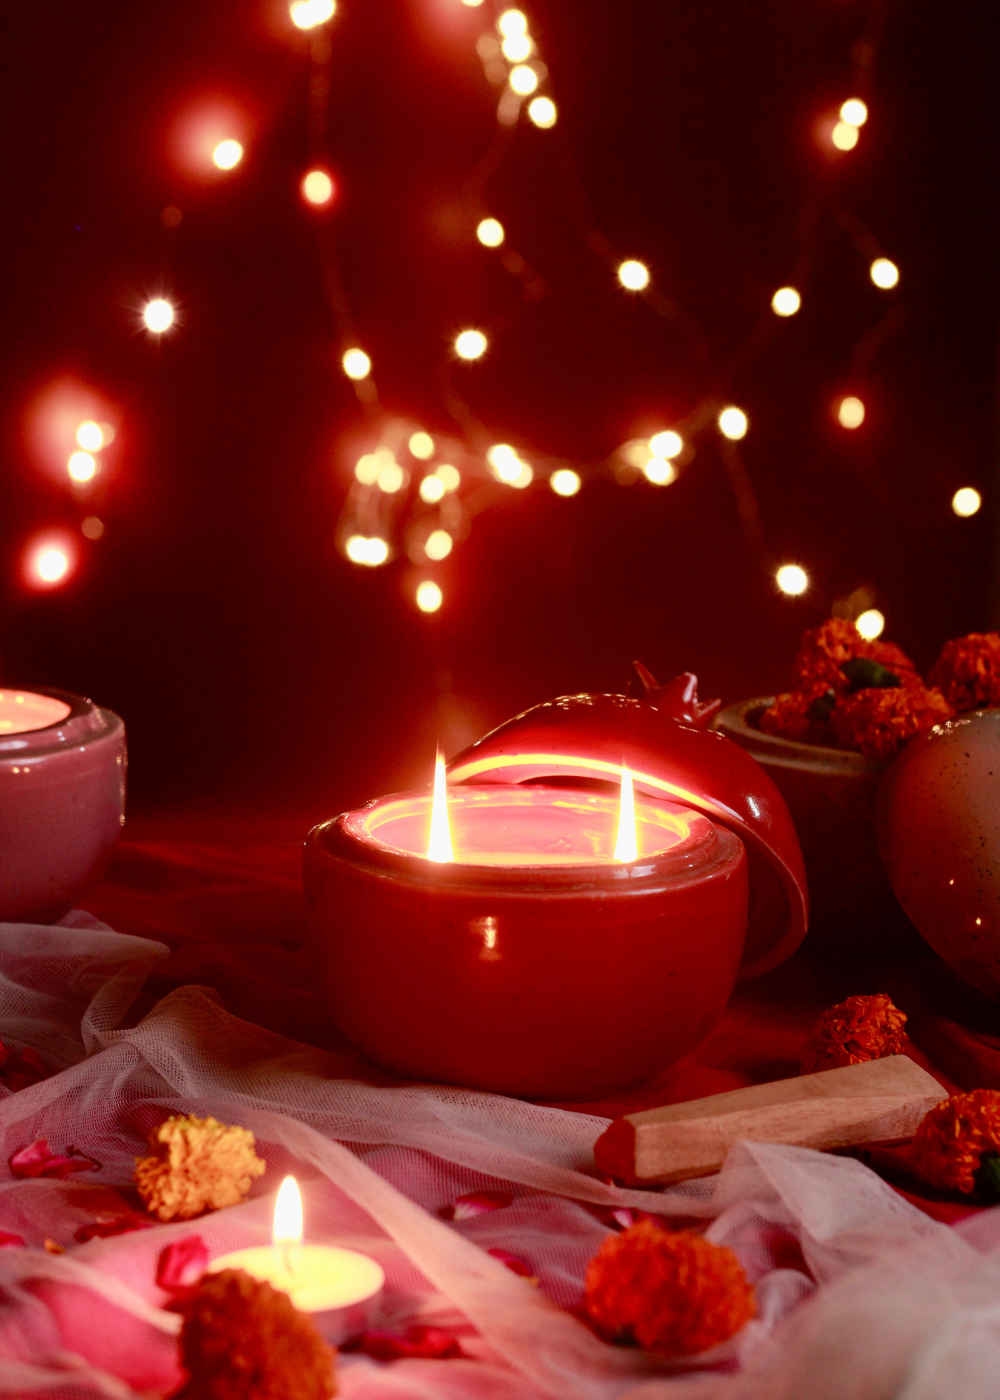 Anar shaped candle red color with flowers and lights